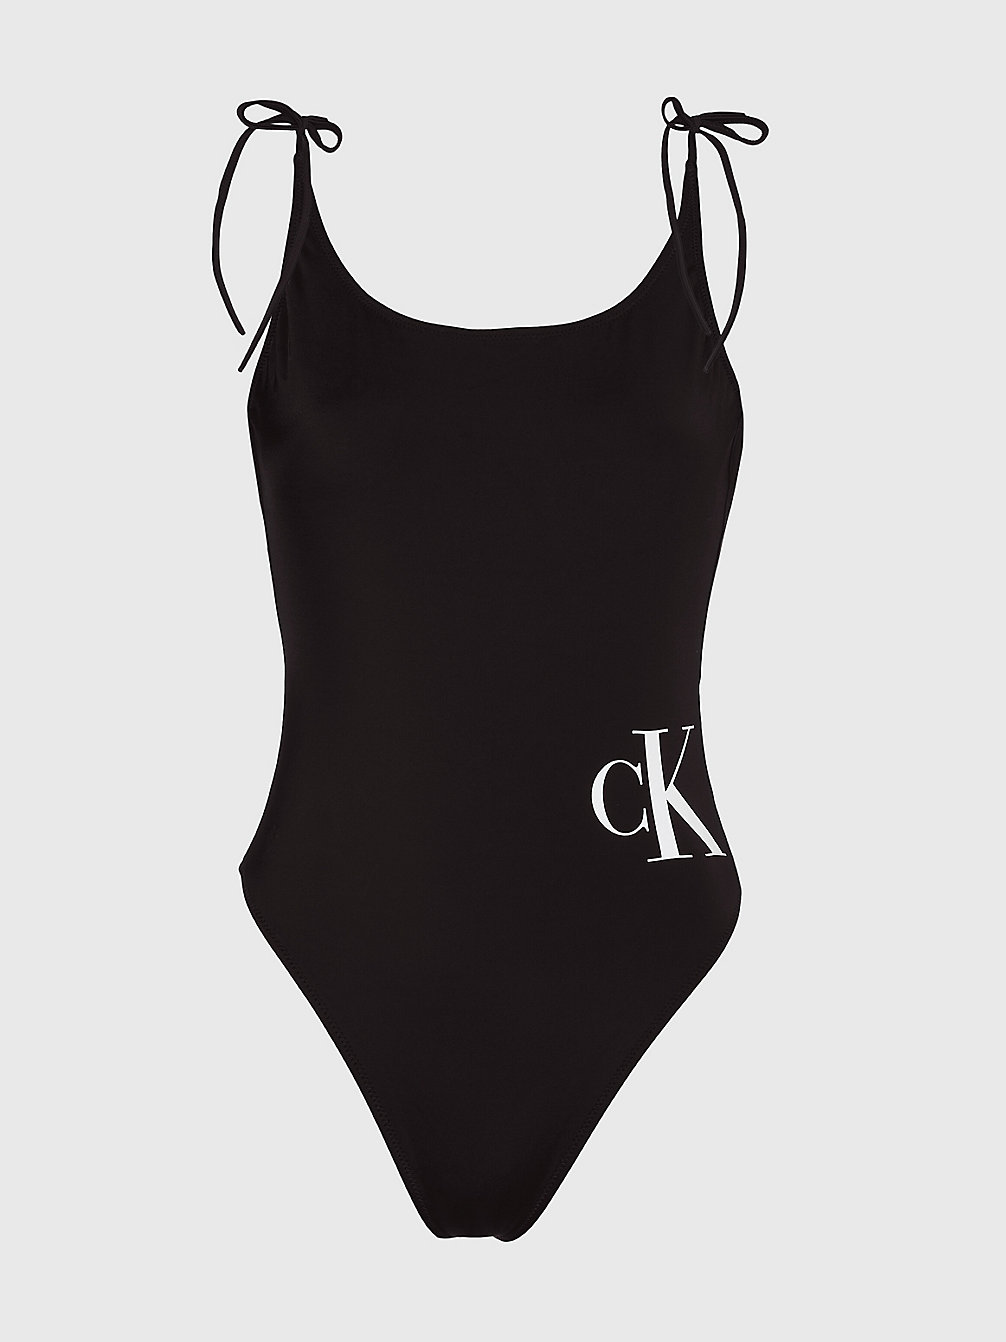 PVH BLACK Swimsuit, Headband And Towel Gift Pack undefined women Calvin Klein